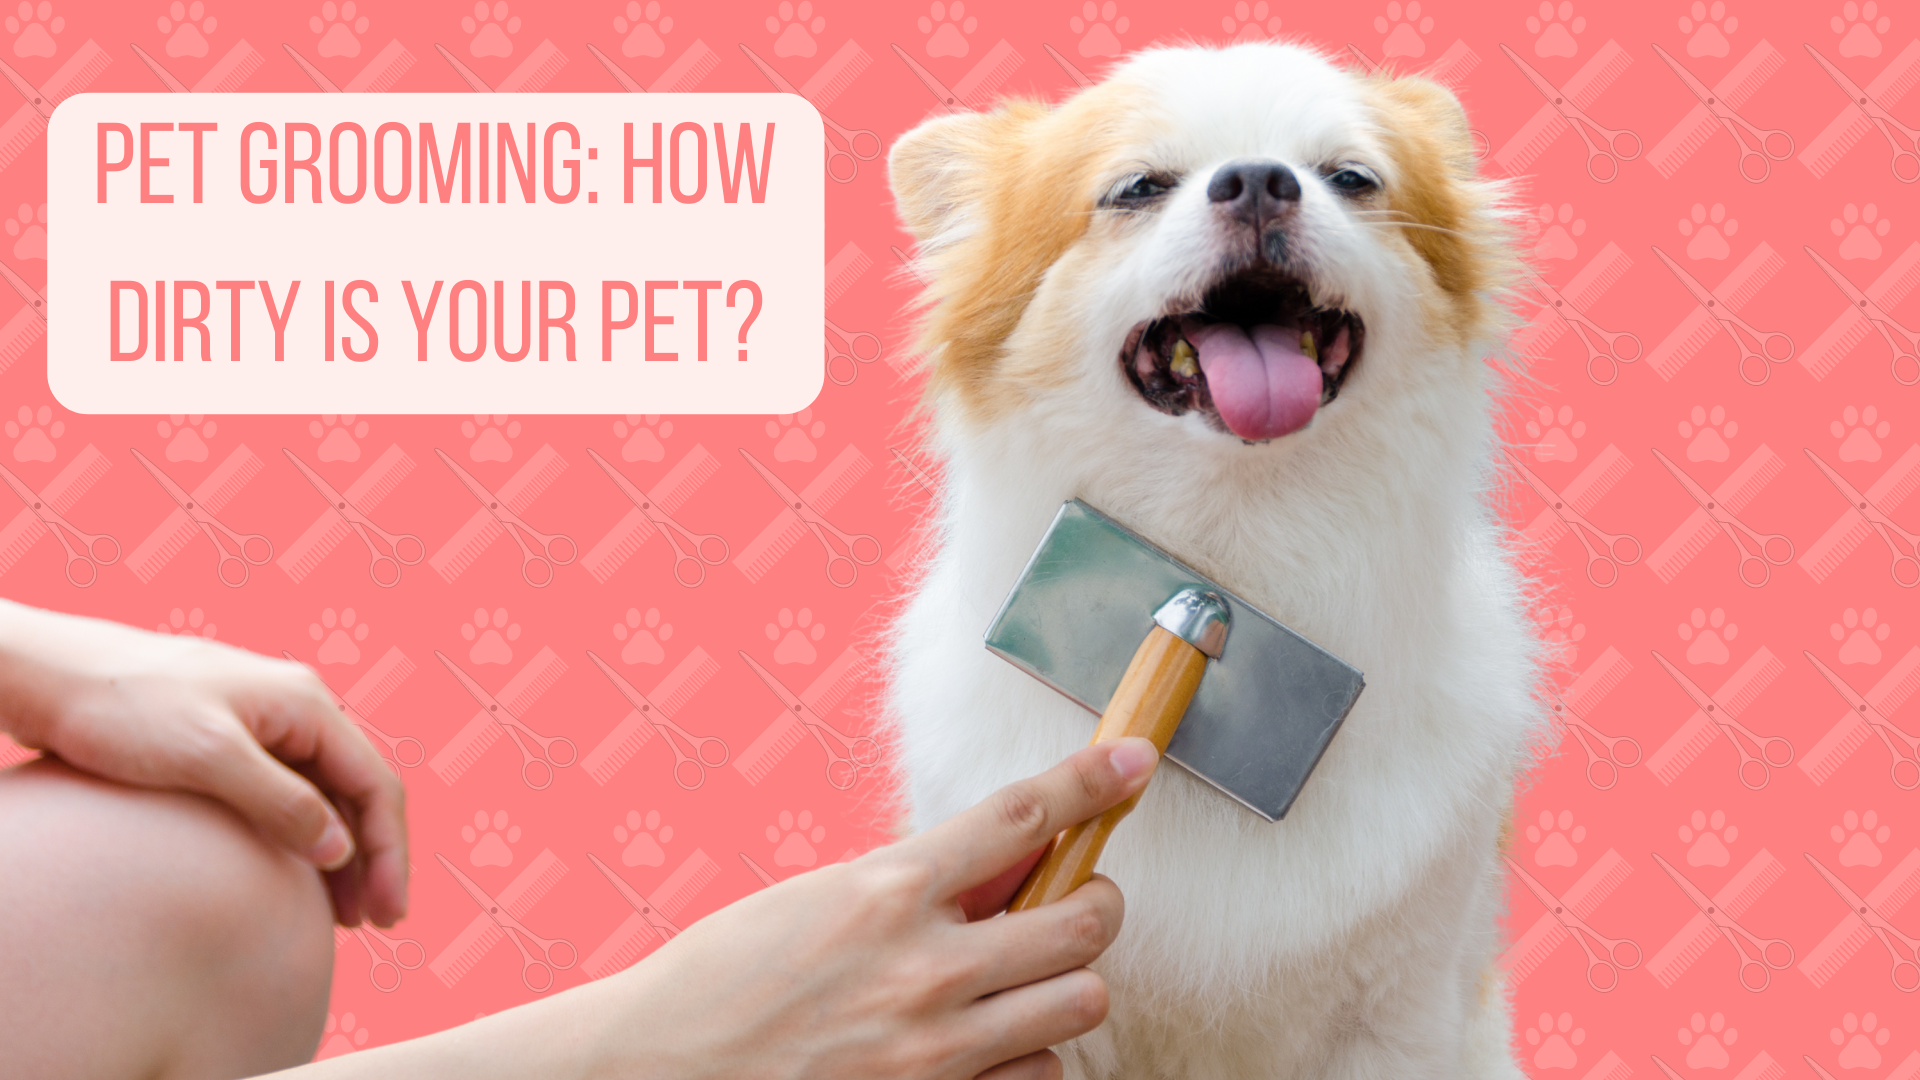 The benefits of grooming your pet regularly